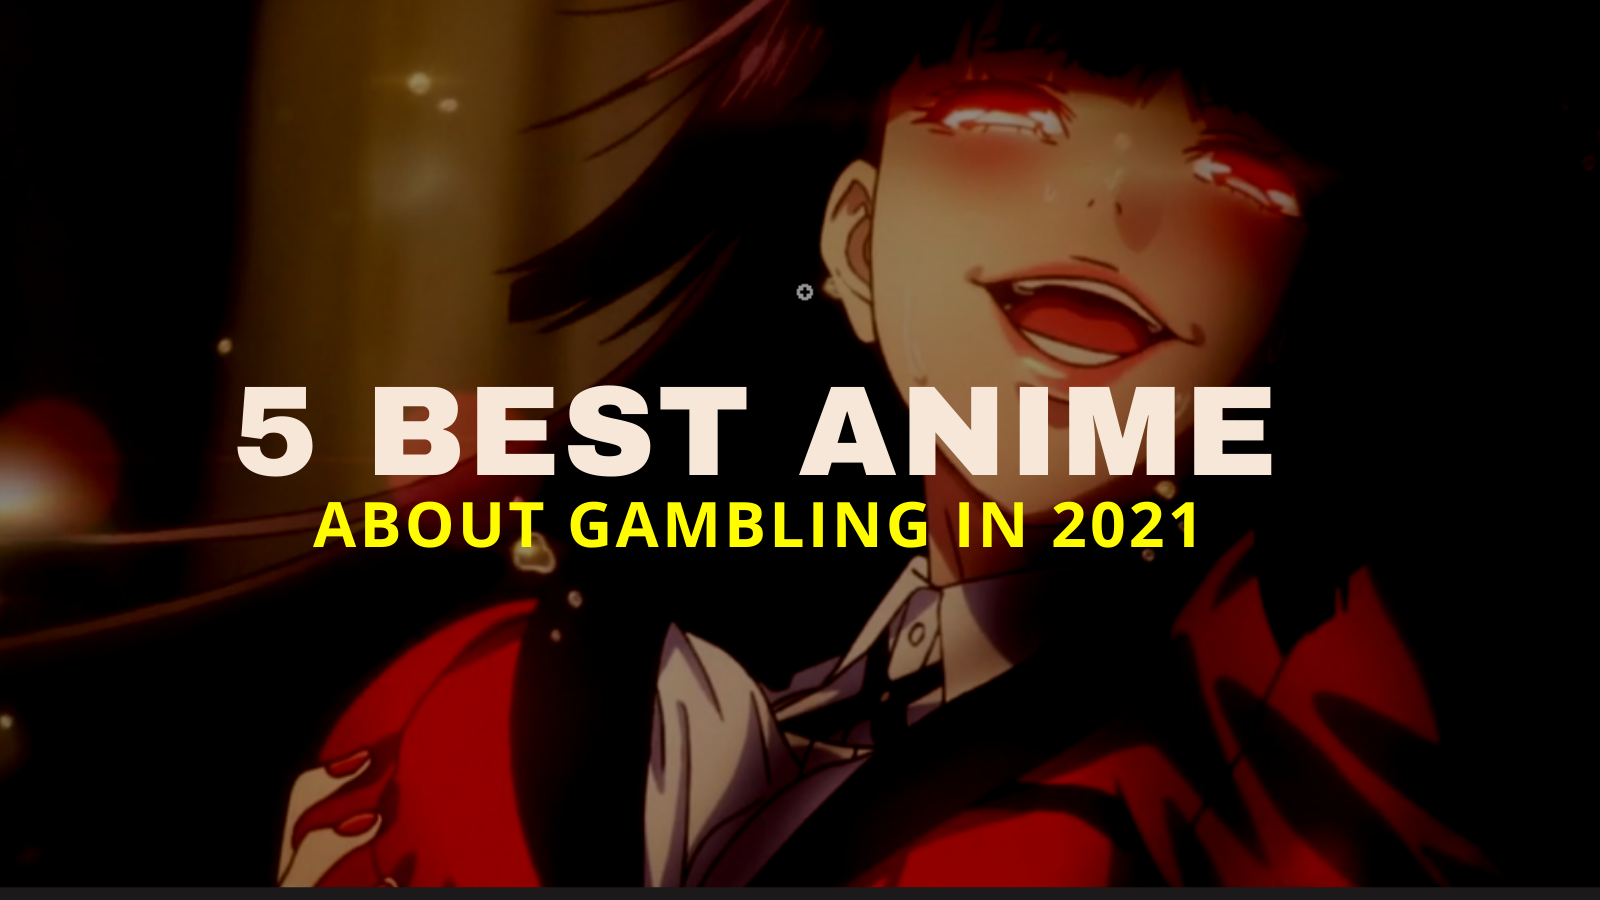 Read more about the article 5 Best Anime About Gambling That You Must Watch in 2021<div class="yasr-vv-stars-title-container"><div class='yasr-stars-title yasr-rater-stars'
                          id='yasr-visitor-votes-readonly-rater-adbd251282966'
                          data-rating='0'
                          data-rater-starsize='16'
                          data-rater-postid='2654'
                          data-rater-readonly='true'
                          data-readonly-attribute='true'
                      ></div><span class='yasr-stars-title-average'>0 (0)</span></div>